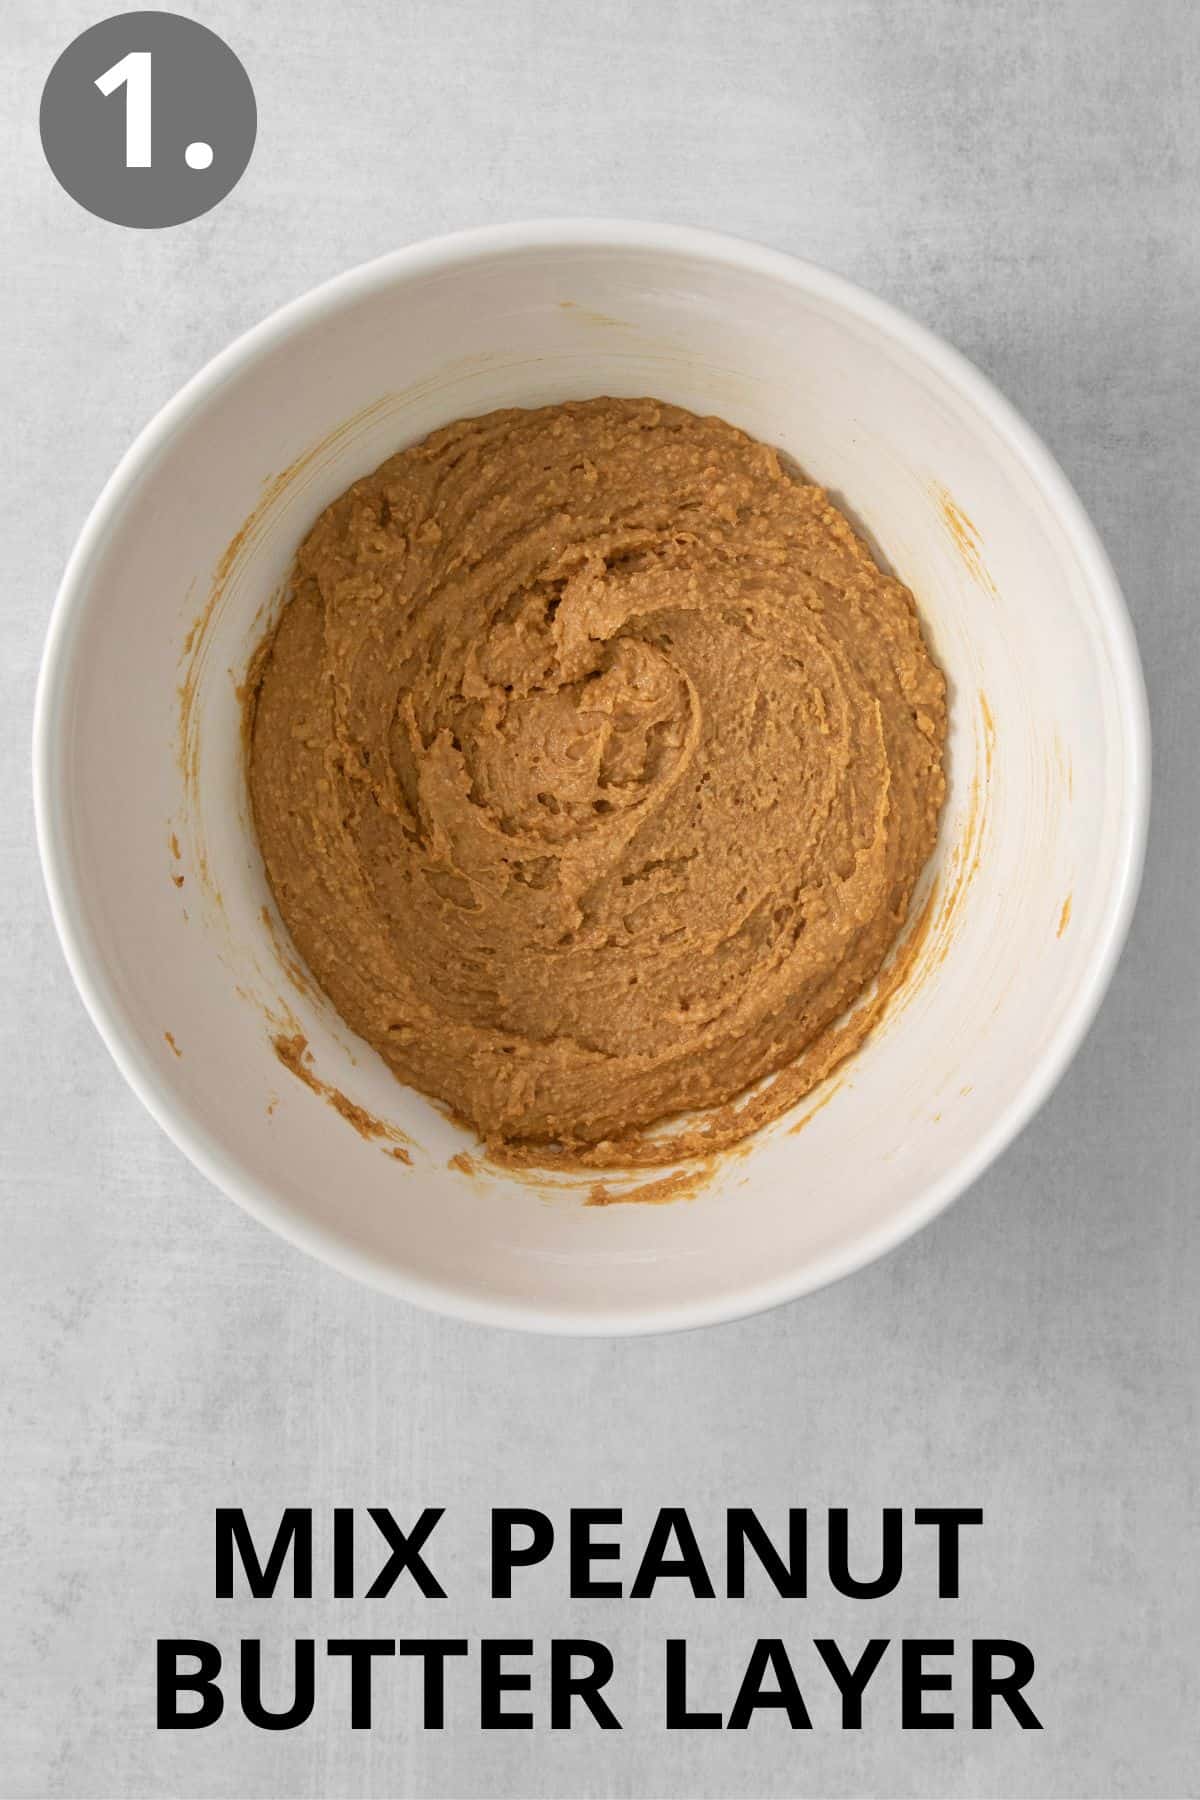 Peanut butter layer in a mixing bowl